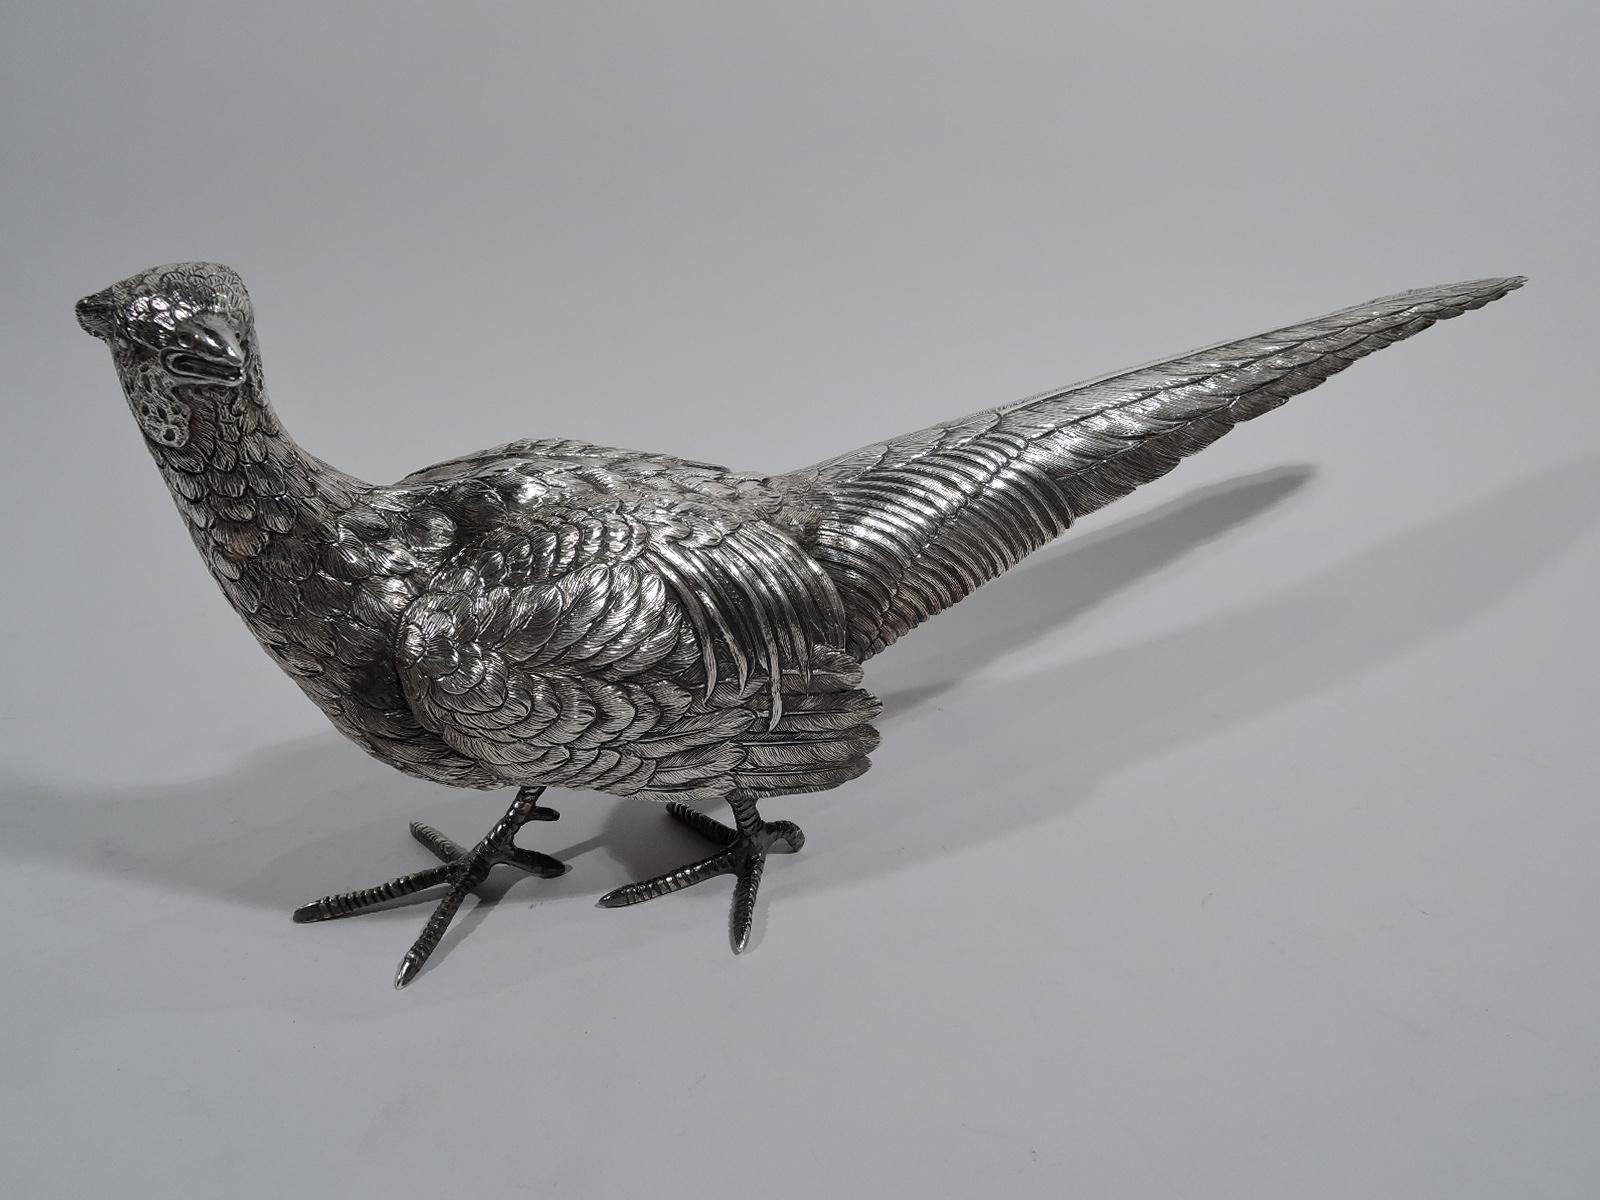 Pair of large sterling silver pheasants, circa 1920. Two birds on the alert. One crouches low with raised wings. The other looks to the side. Fierce and wary with big scaly talons and dense, textual plumage. Versatile, too. Can be posed to suggest a